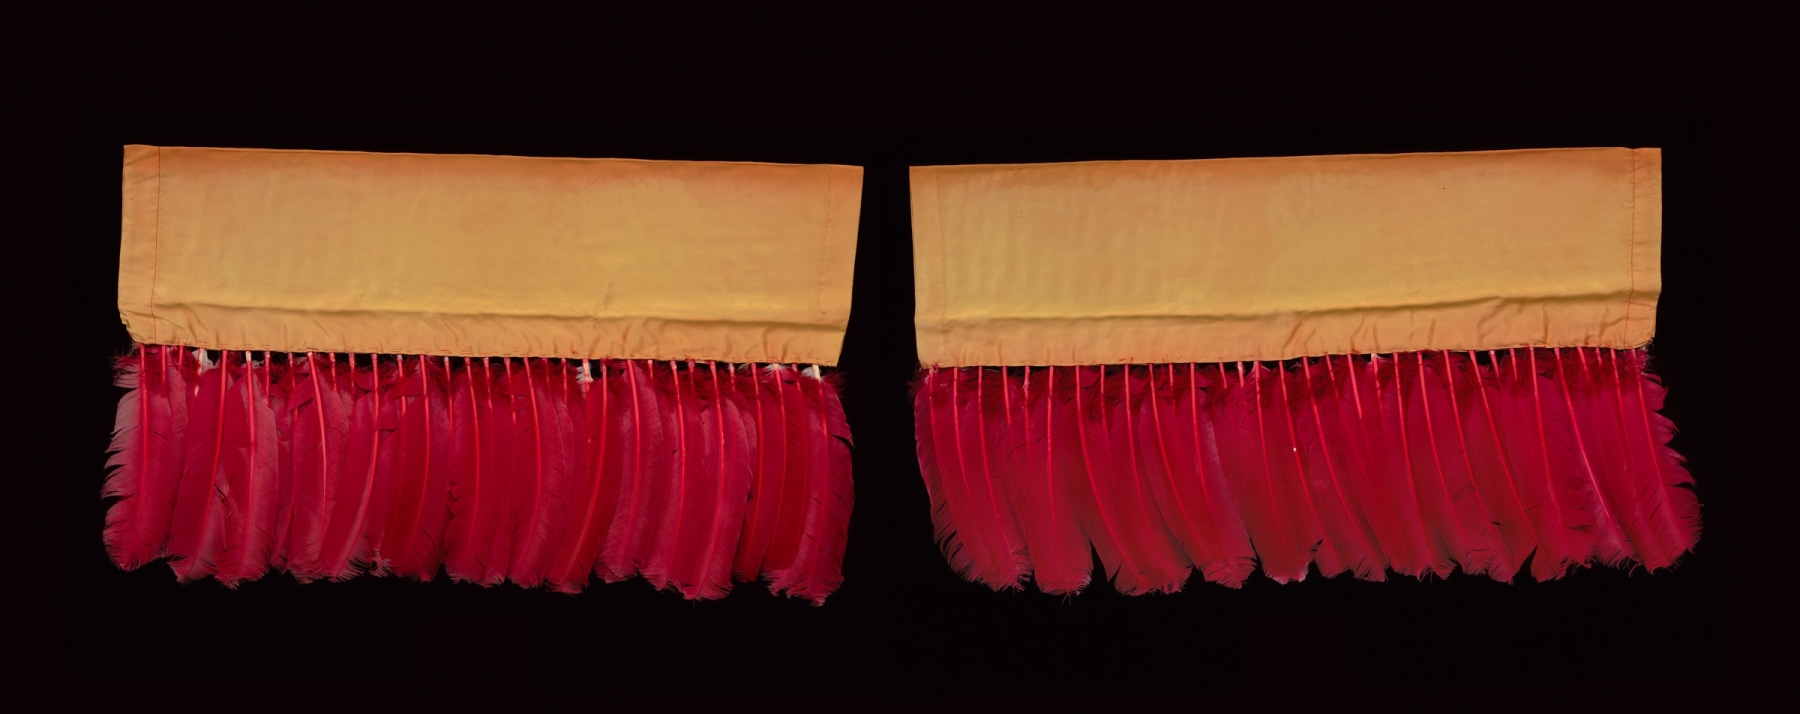 James Lee Byars

&amp;ldquo;The Wings for Writing&amp;rdquo;, ca. 1972

Dyed feathers, silk, thread

Two parts, each:

19 x 32 3/4 inches

48 x 83 cm

JB 7/F